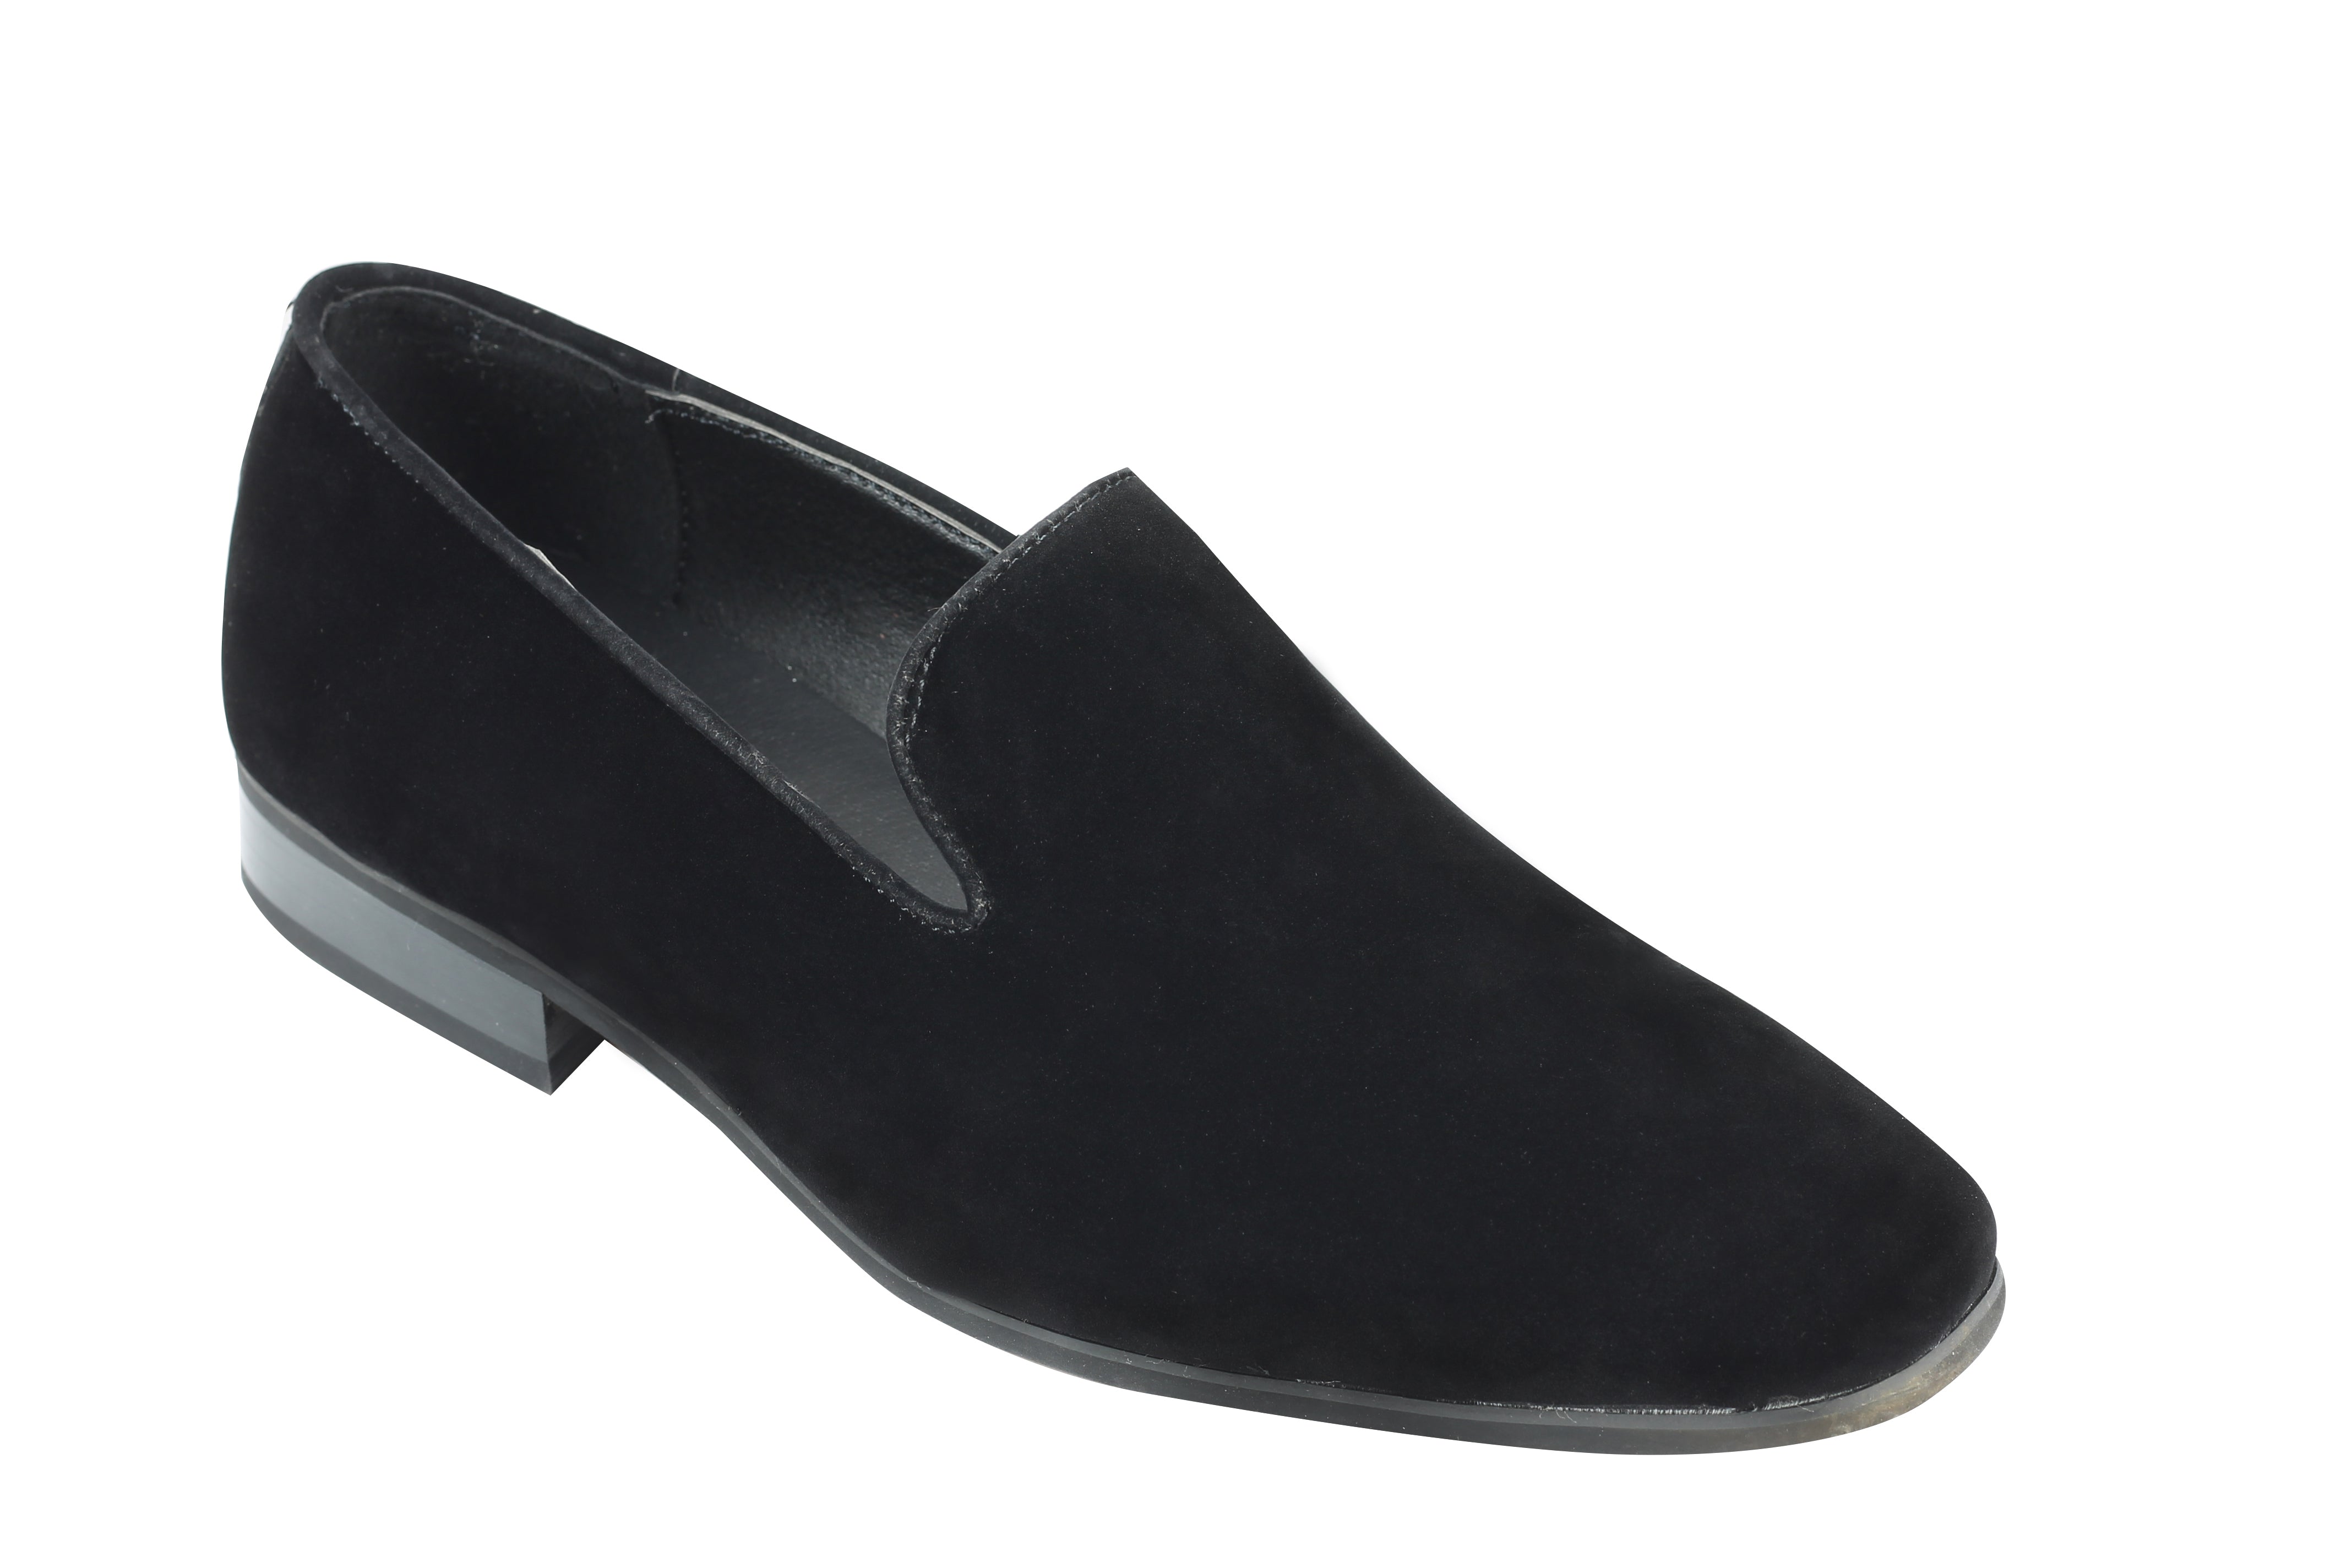 Suede Leather Slip On Shoes